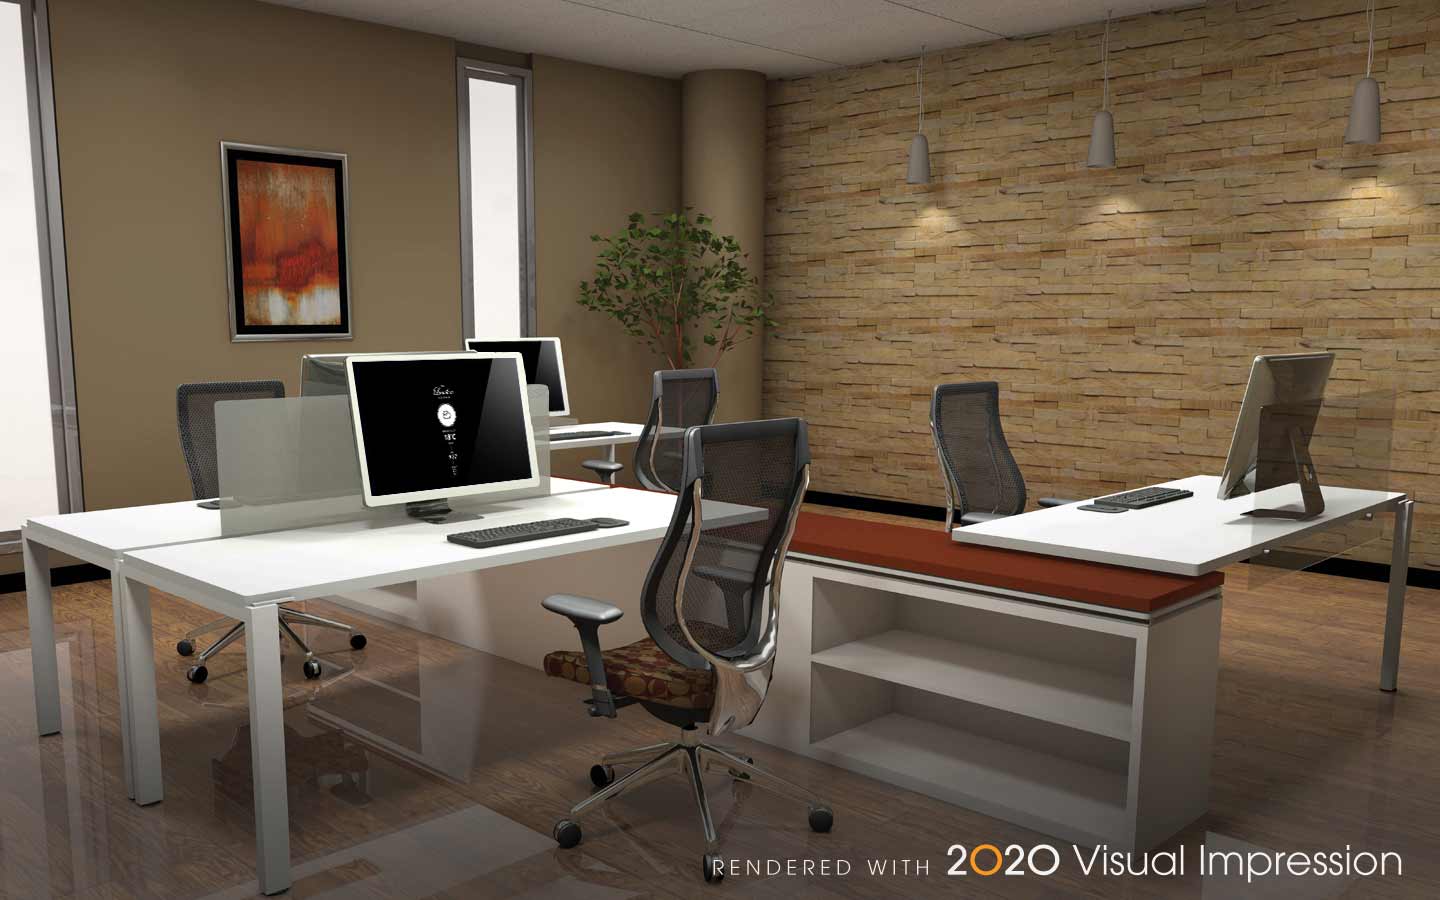 2020 Office, 2020 Visual Impression, 2020 Visual Impression Rendering, Office Space Planning, Office design software, Office Visualization Software